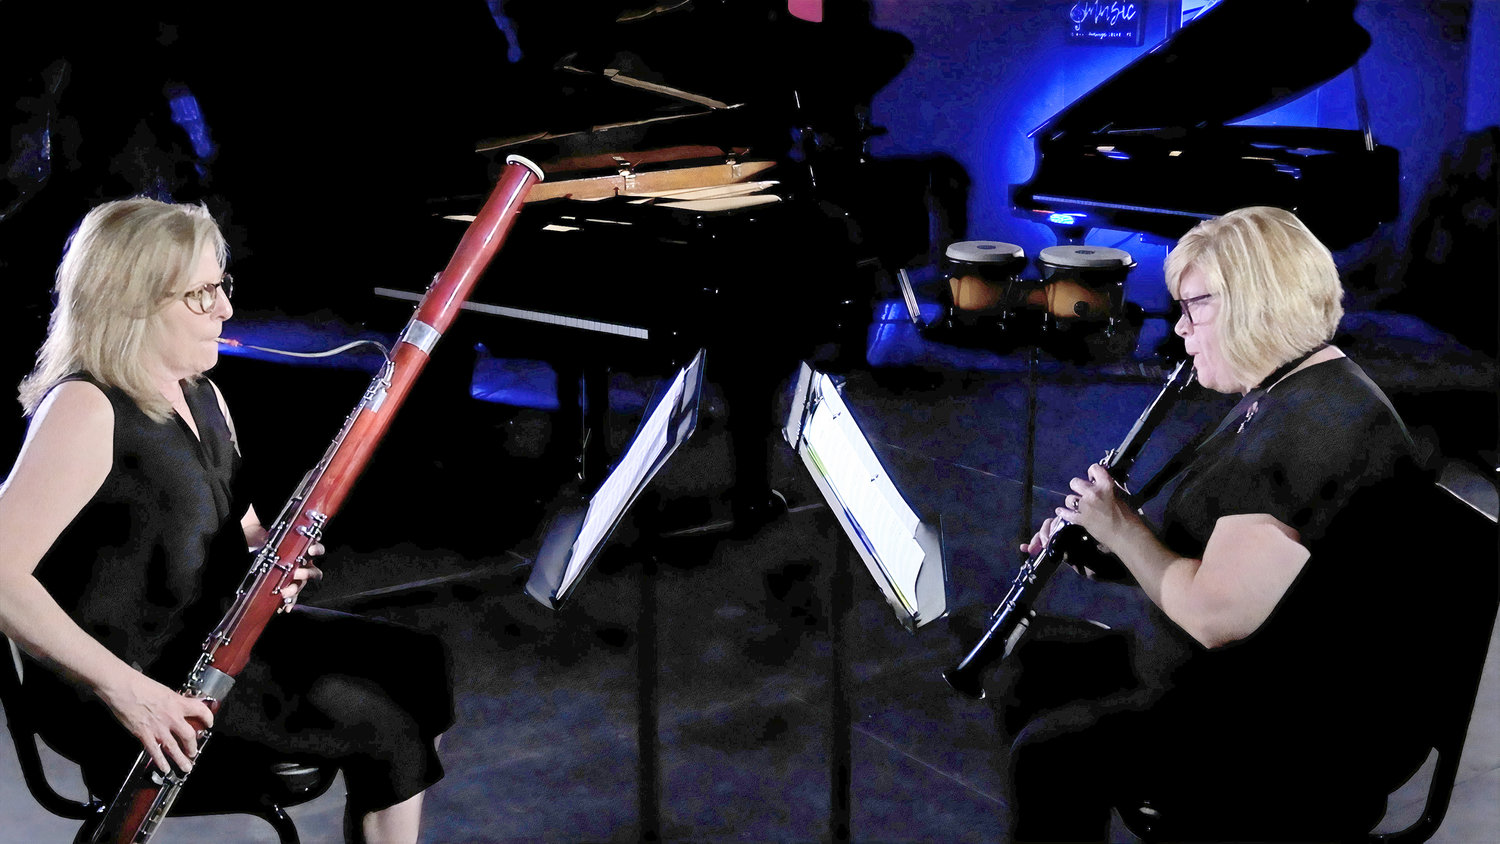 HELPING YOUNG MUSICIANS — Judy Marchione, bassoon, and Colleen O’Neil, clarinet, perform as part of a fundraiser for the Herb Geller Memorial Scholarship Concert Series PREformance at Center Stage Music.